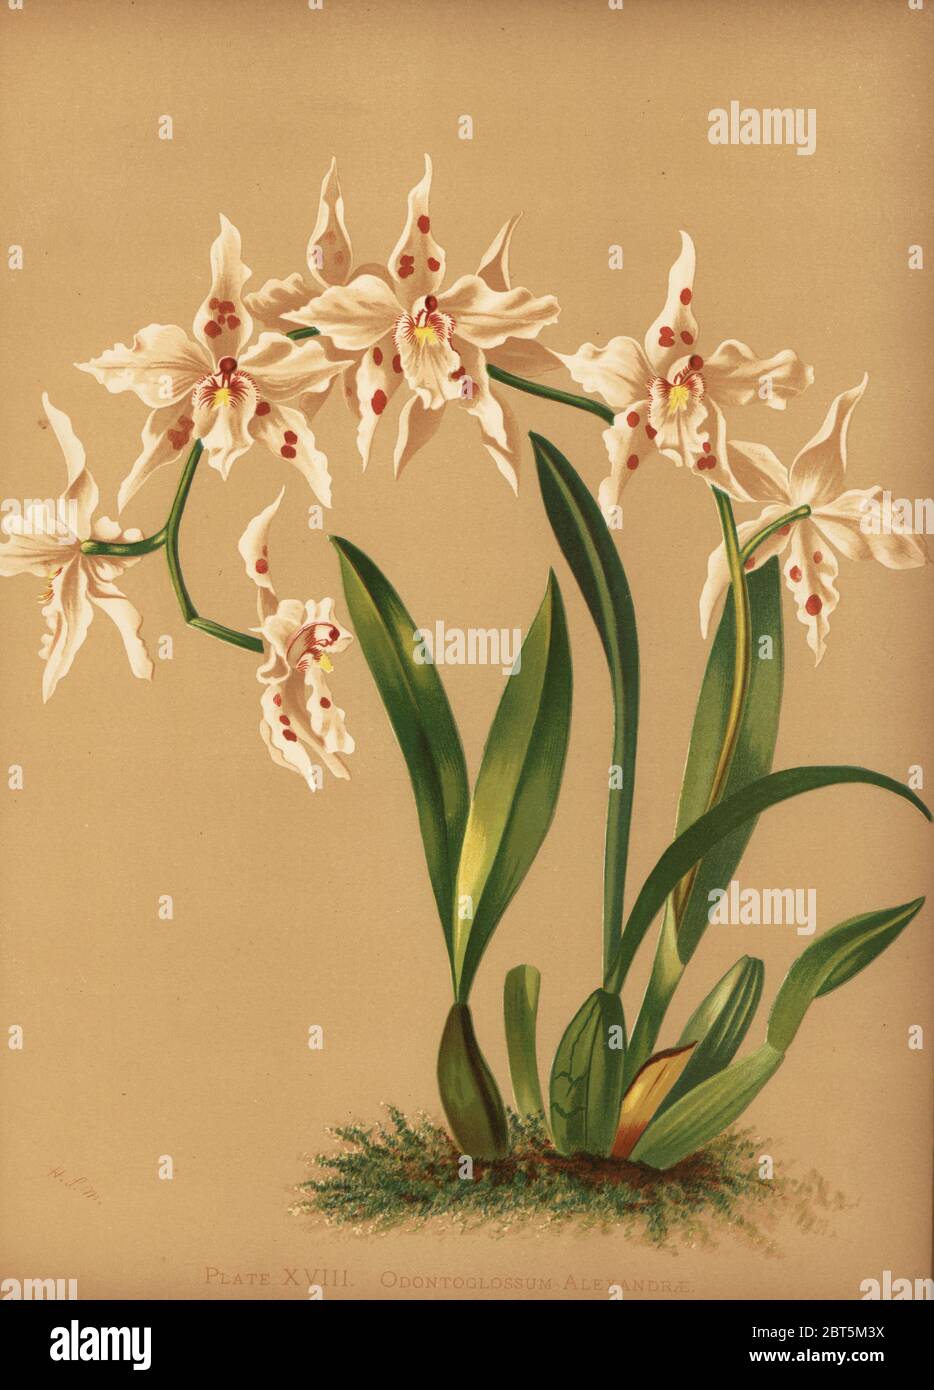 Dancing lady orchid, Oncidium alexandrae (Odontoglossum alexandrae). Chromolithograph by Hatch Company after a botanical illustration by Harriet Stewart Miner from Orchids, the Royal Family of Plants, Lee & Shepard, Boston, 1885. The first American color plate book on orchids by woman botanist Miner. Stock Photo